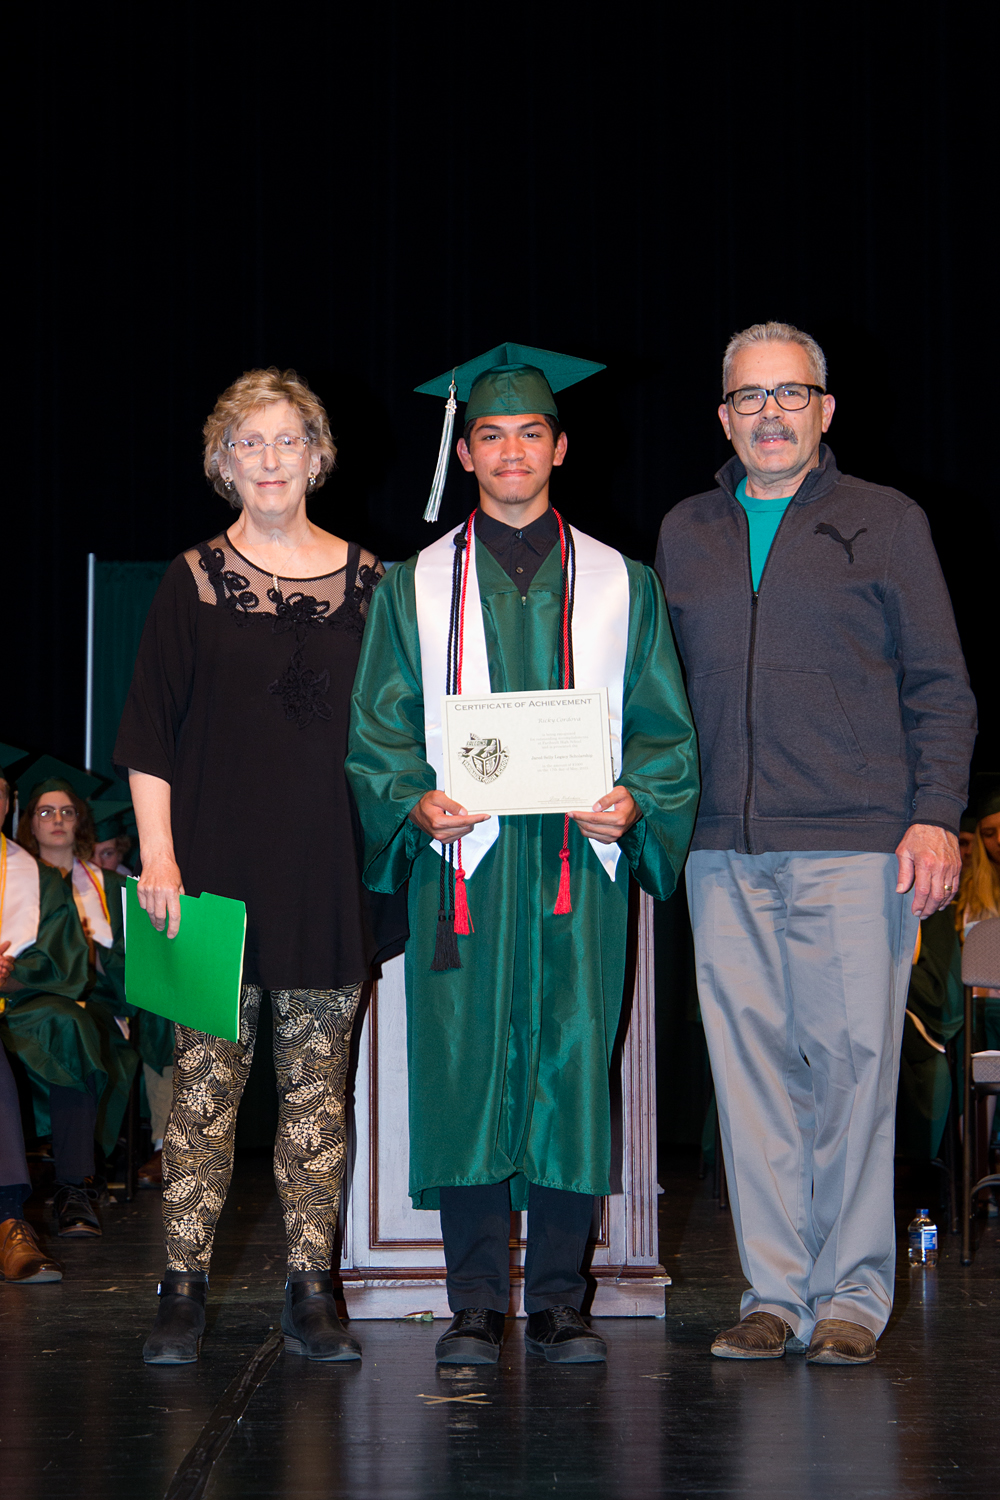 Jared Sully Legacy Scholarship: Linda and Jeff Selly & Ricky Cordov